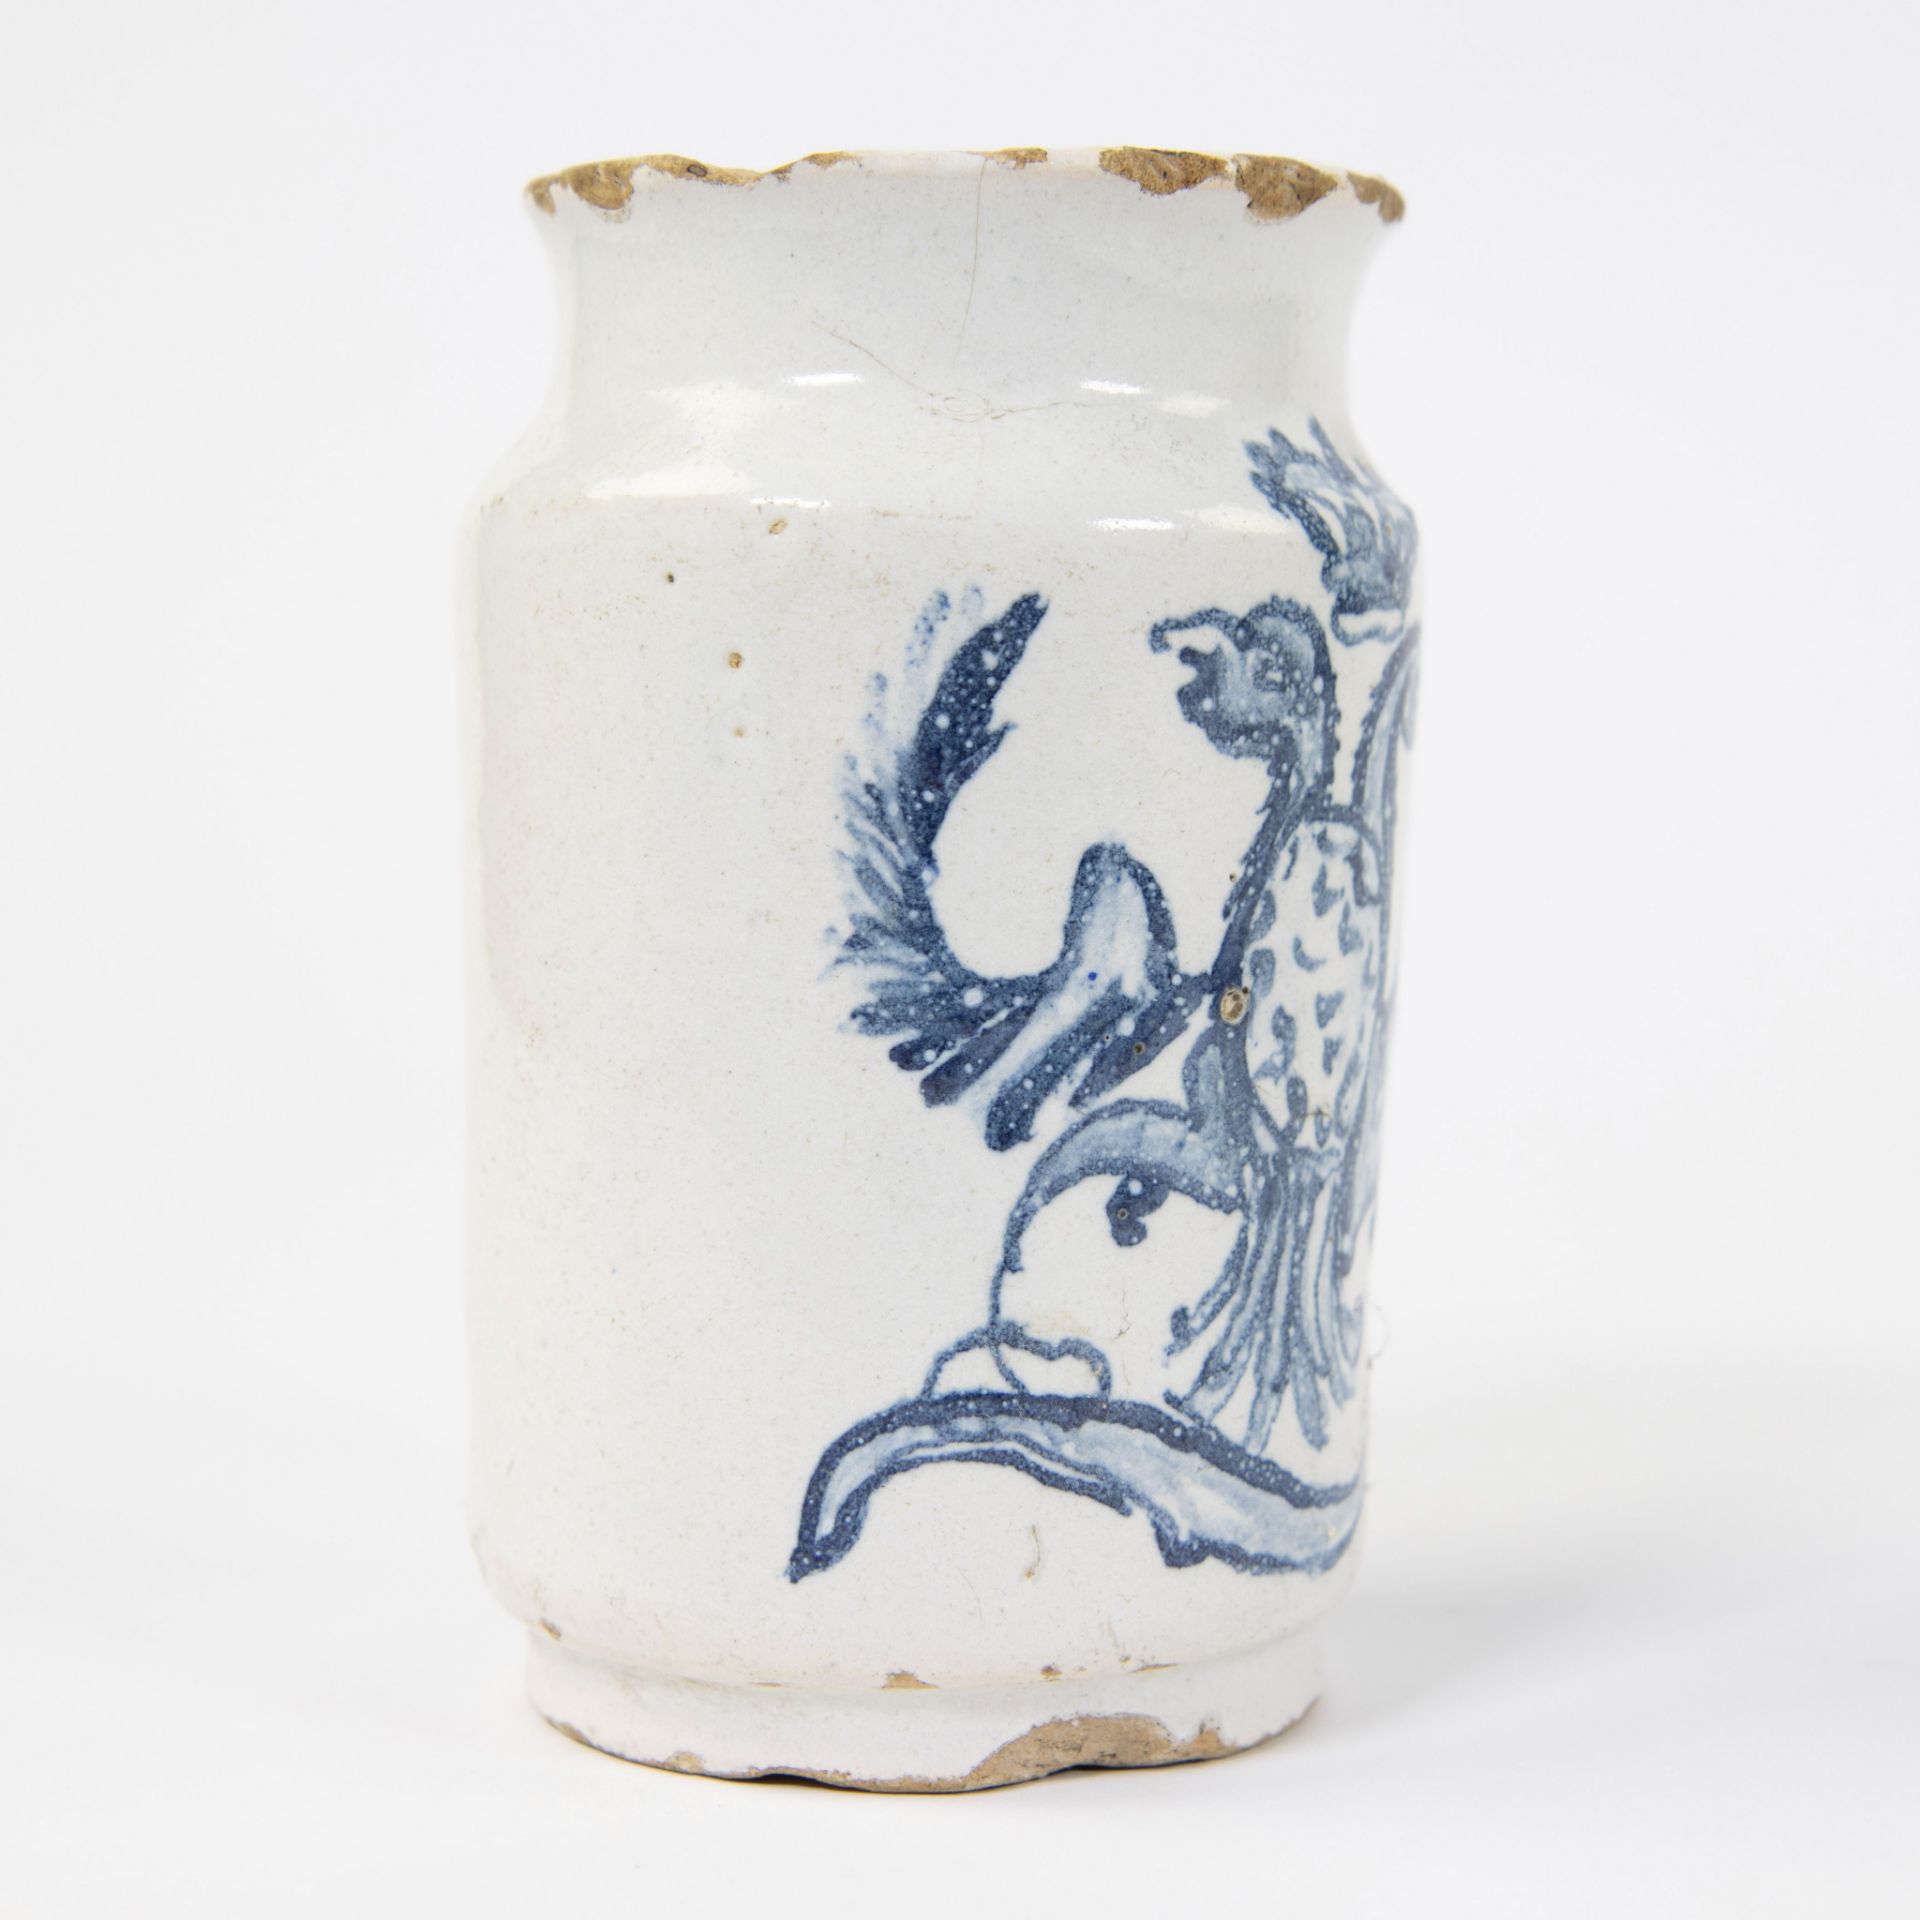 Ointment jar 17th century - Image 4 of 5